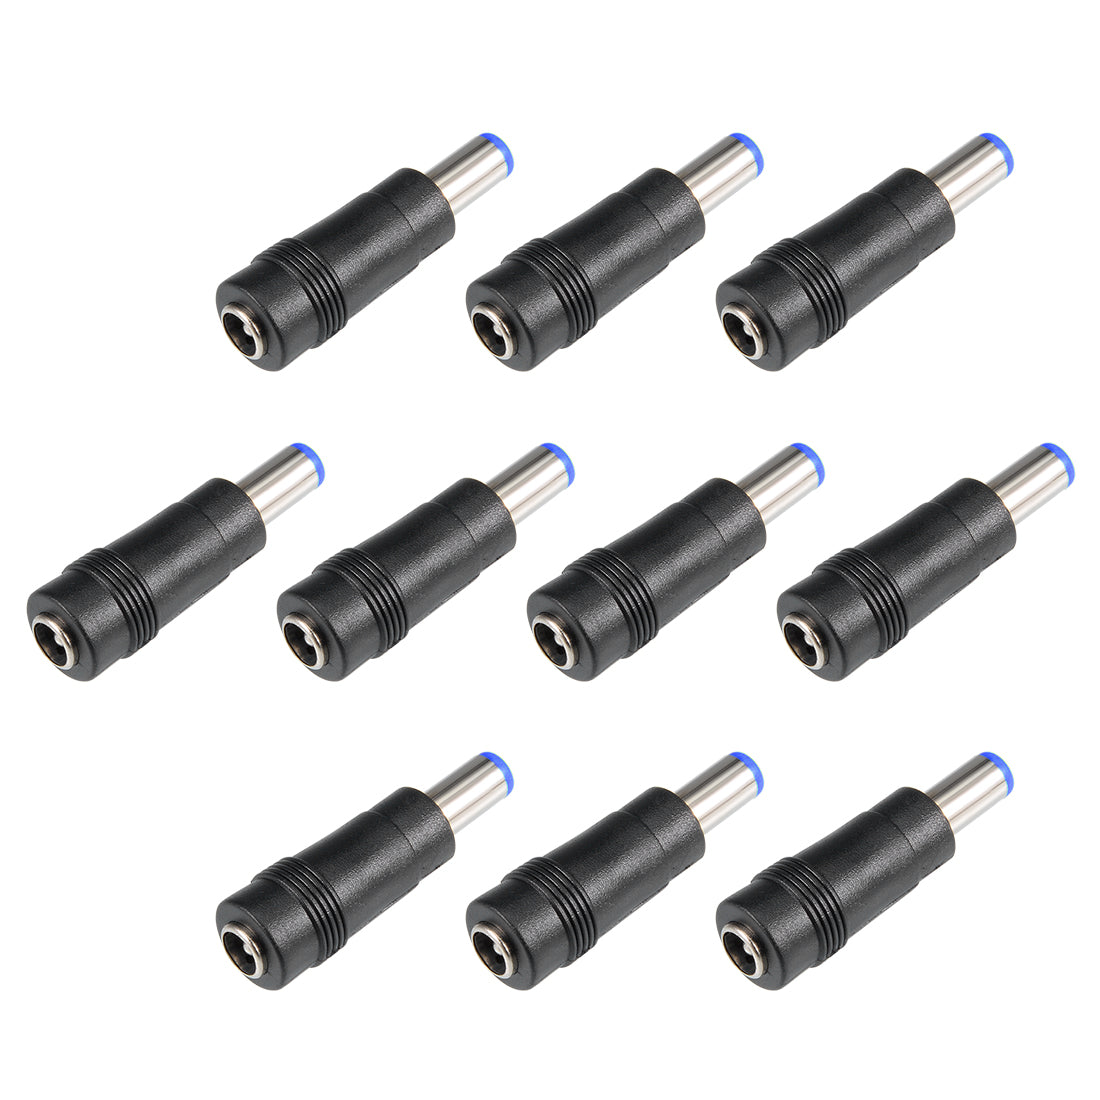 uxcell Uxcell 10 Pcs Copper DC Power Connector 5.5mmx2.1mm Female to 5.5mmx2.1mm Male Adapter